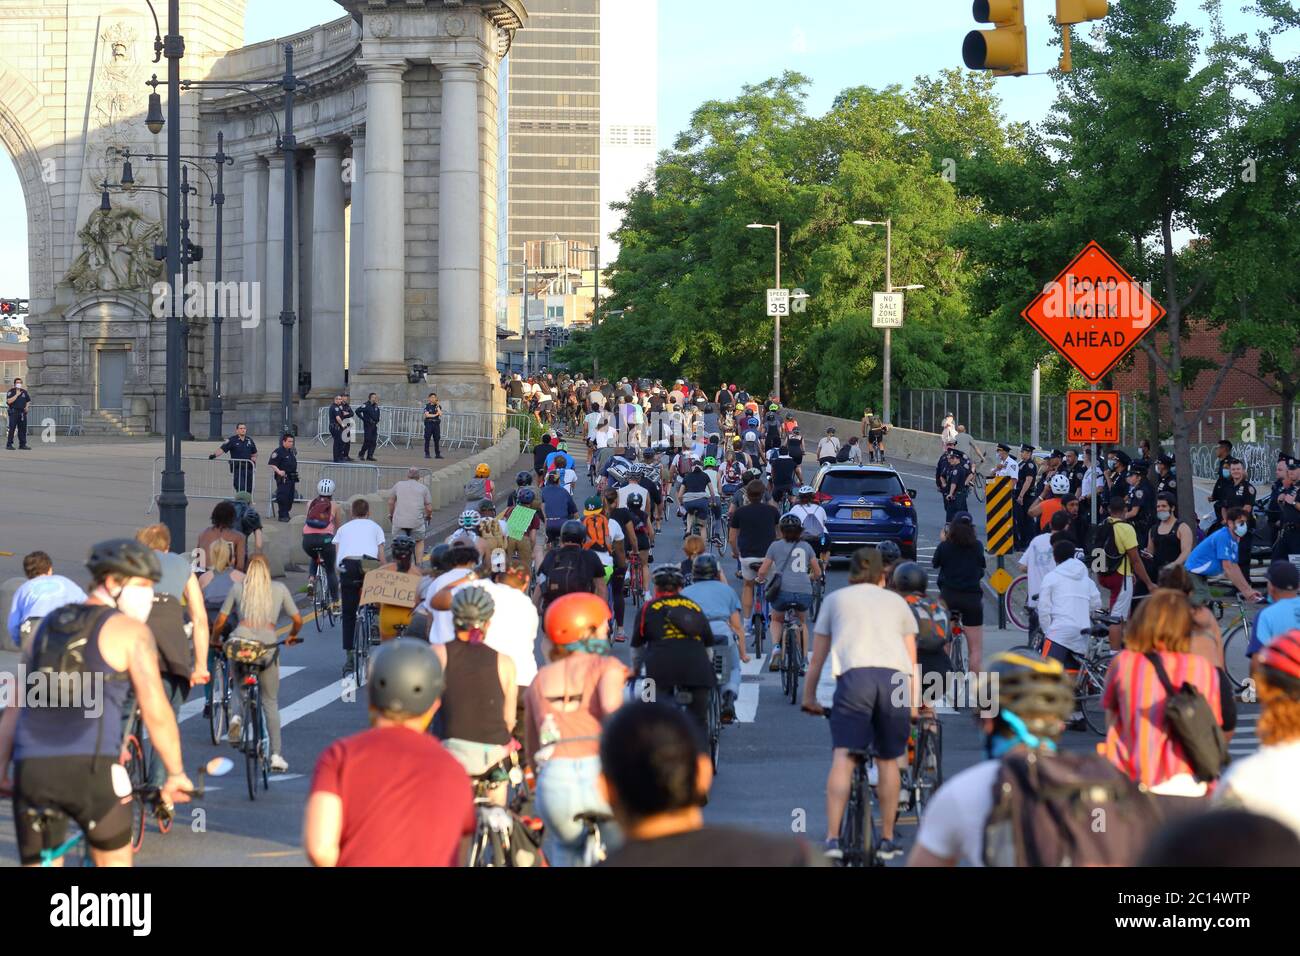 New York, NY. June 8, 2020. Over a thousand cyclists enter the Manhattan Bridge roadway in a Black Lives Matter solidarity ride through Brooklyn and Stock Photo